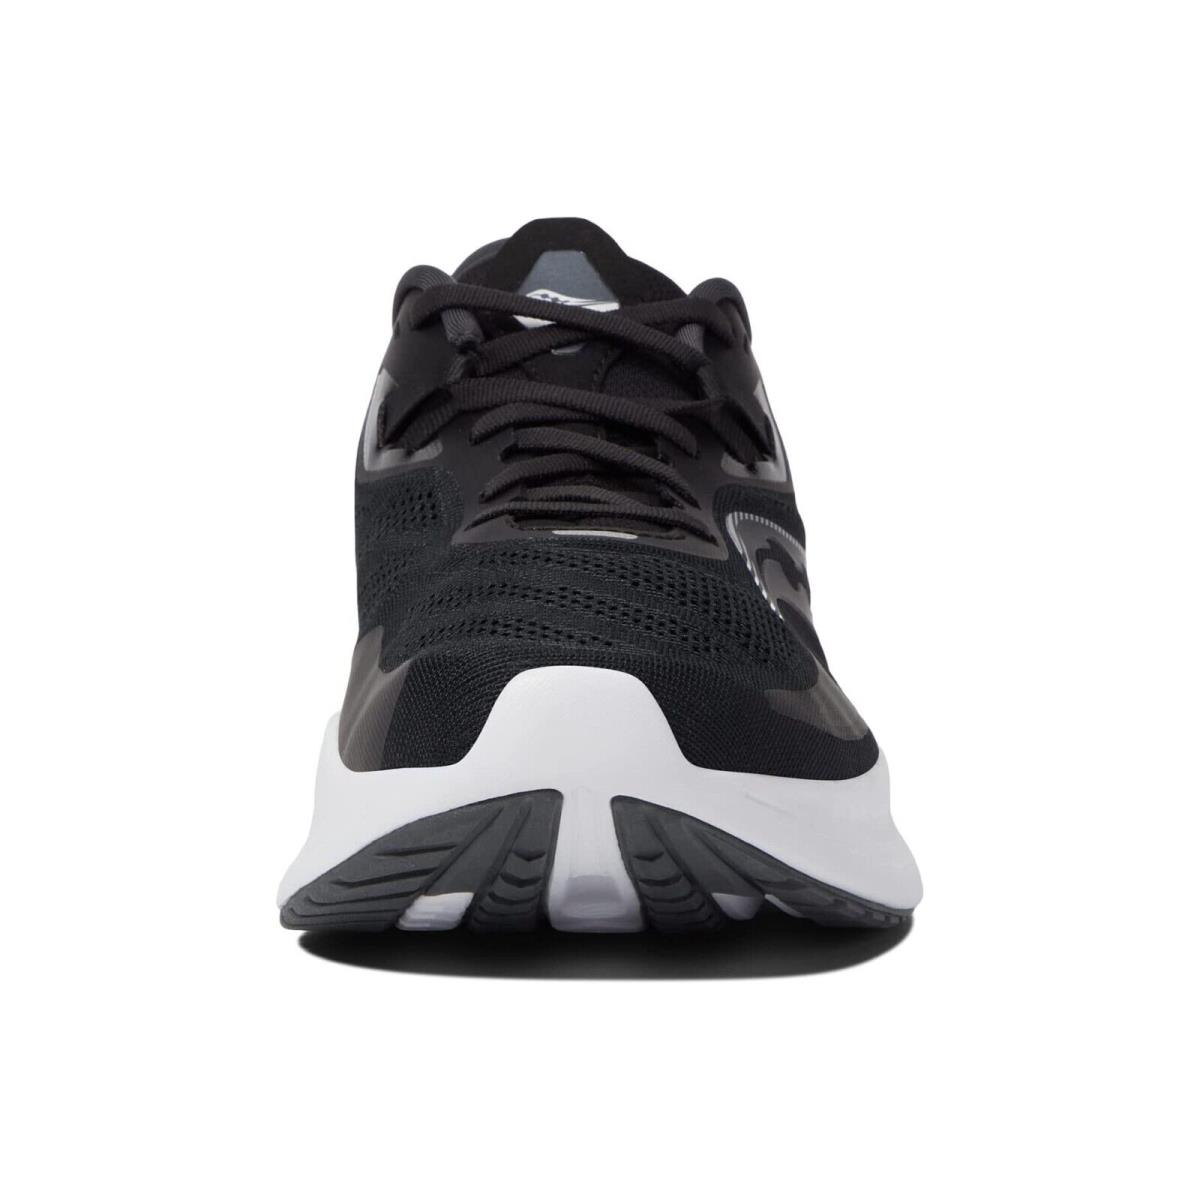 Saucony shoes Guide Wide - Black/White 0